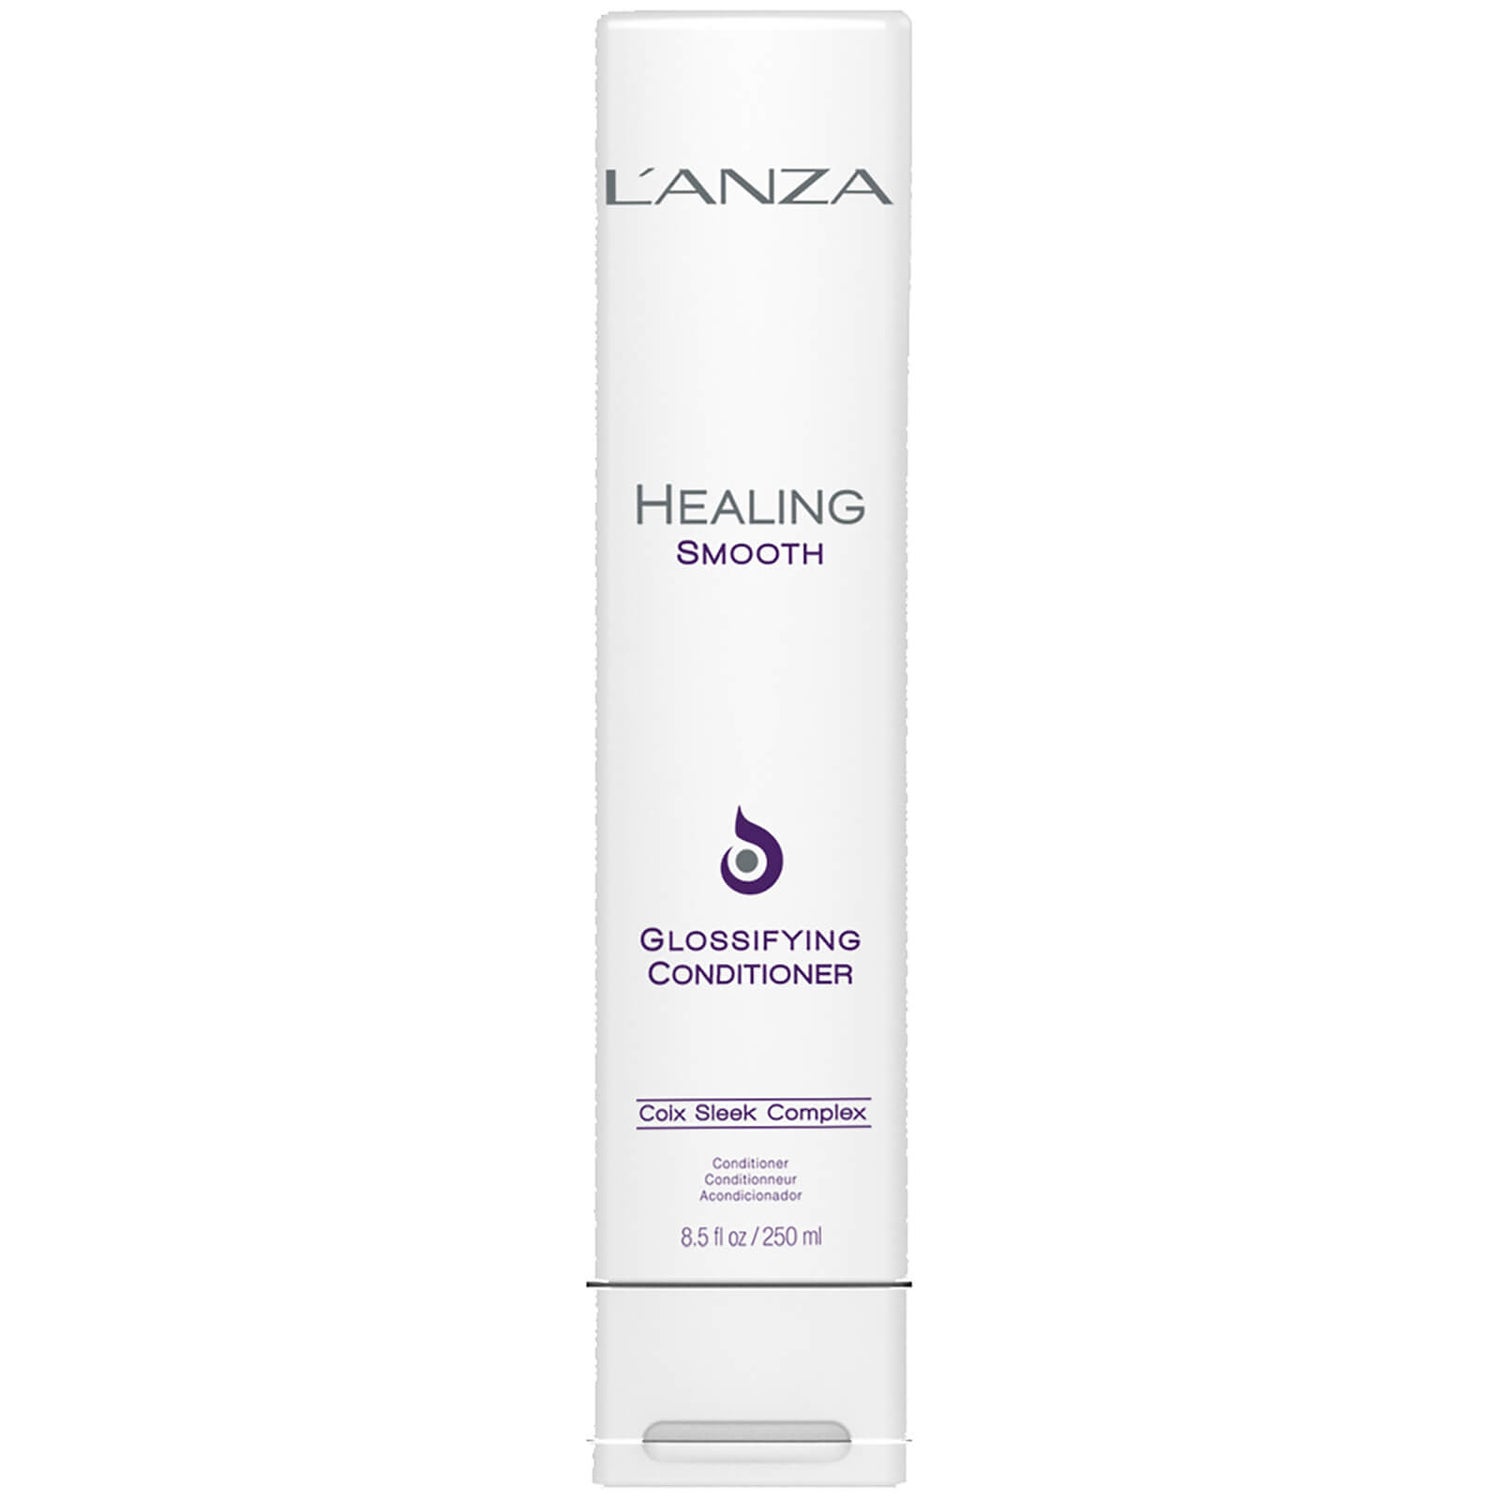 L'Anza Healing Smooth Glossifying Conditioner (Glanz) 250ml